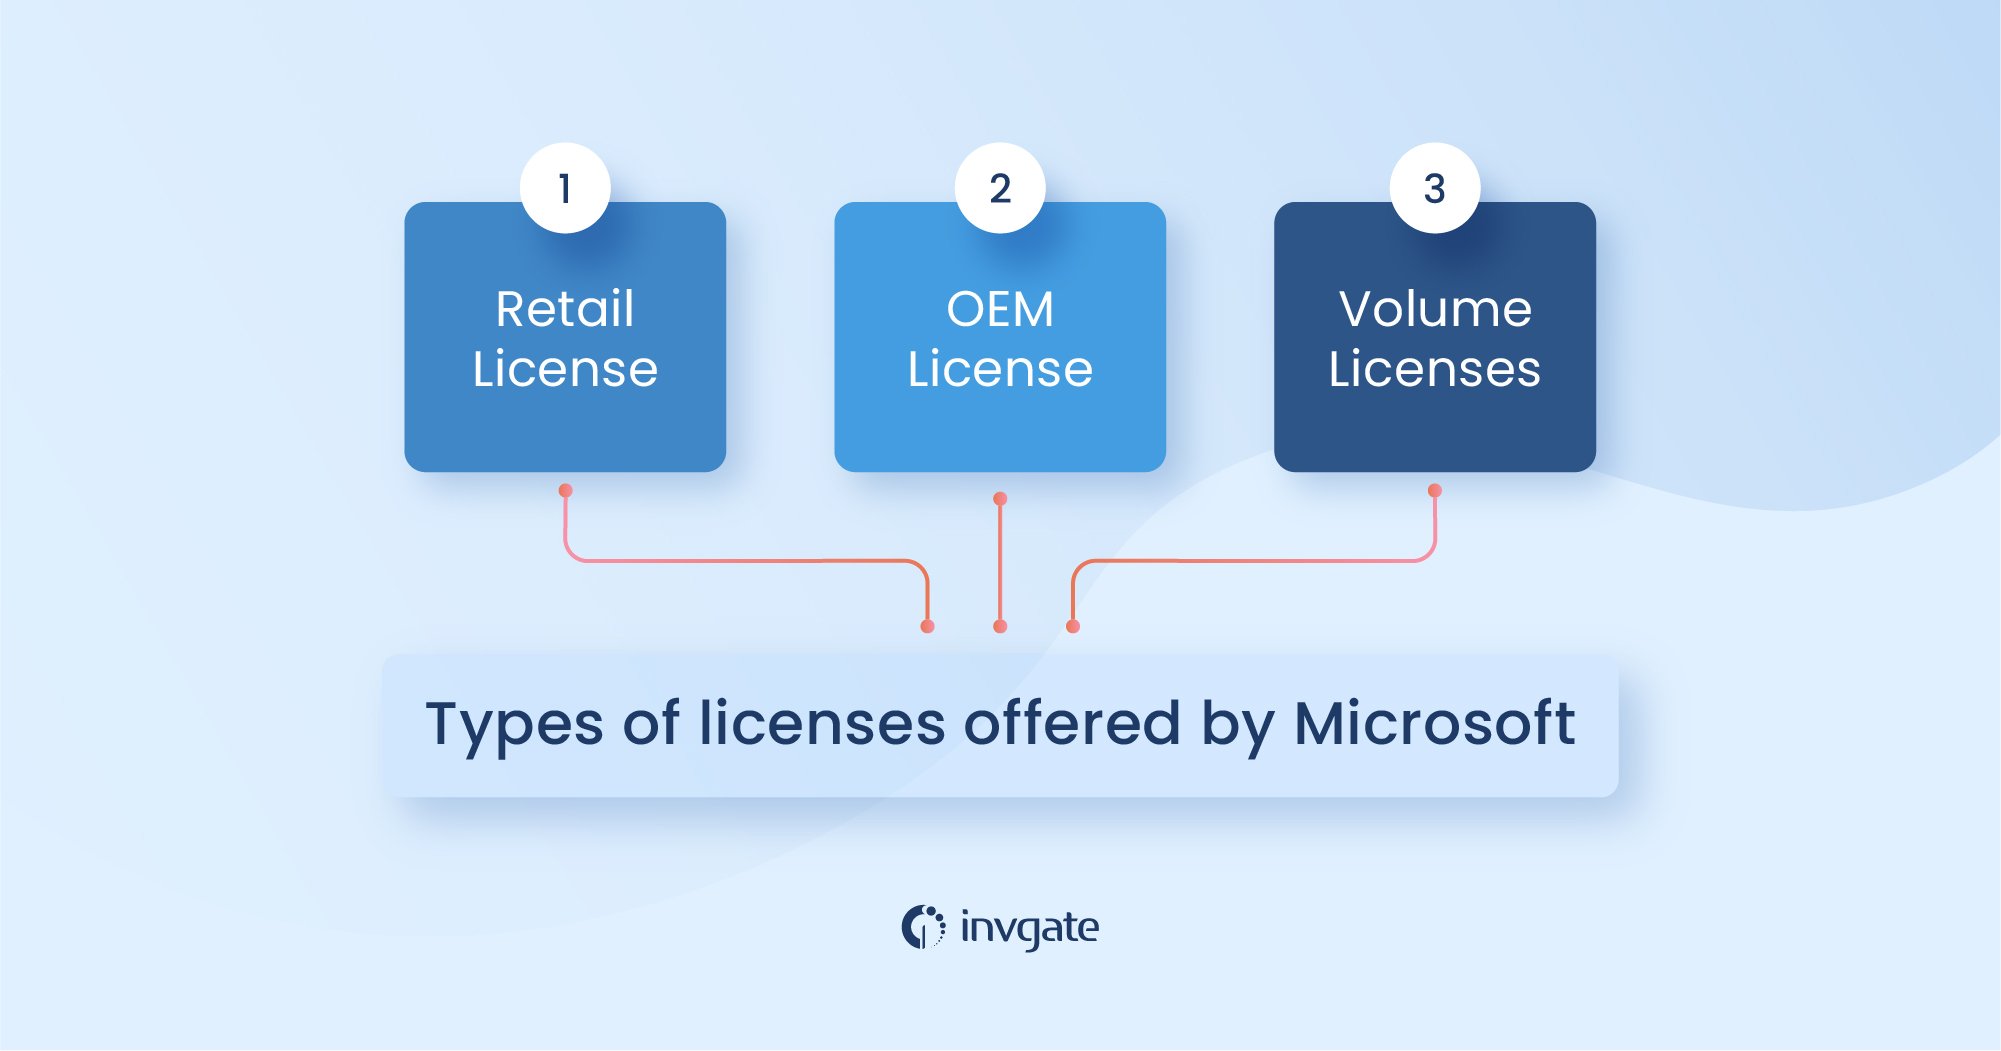 Types of licenses offered by Microsoft